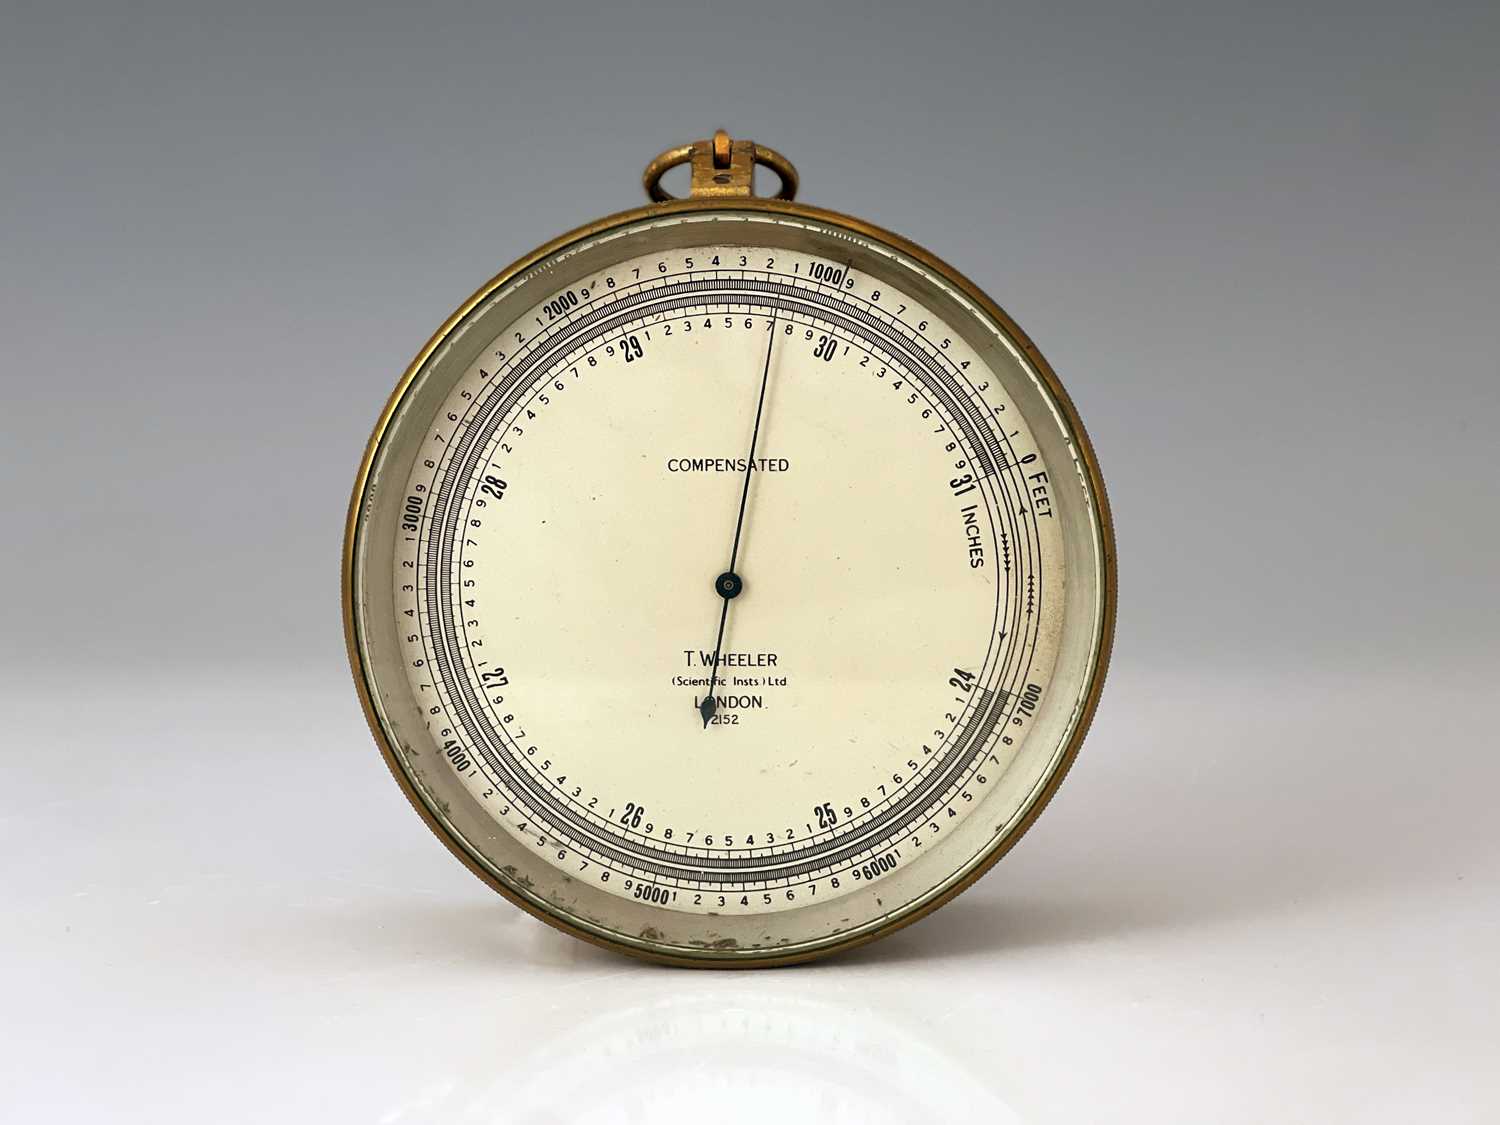 T. Wheeler, London, an early 20th Century Compensated brass military marine barometer, silvered